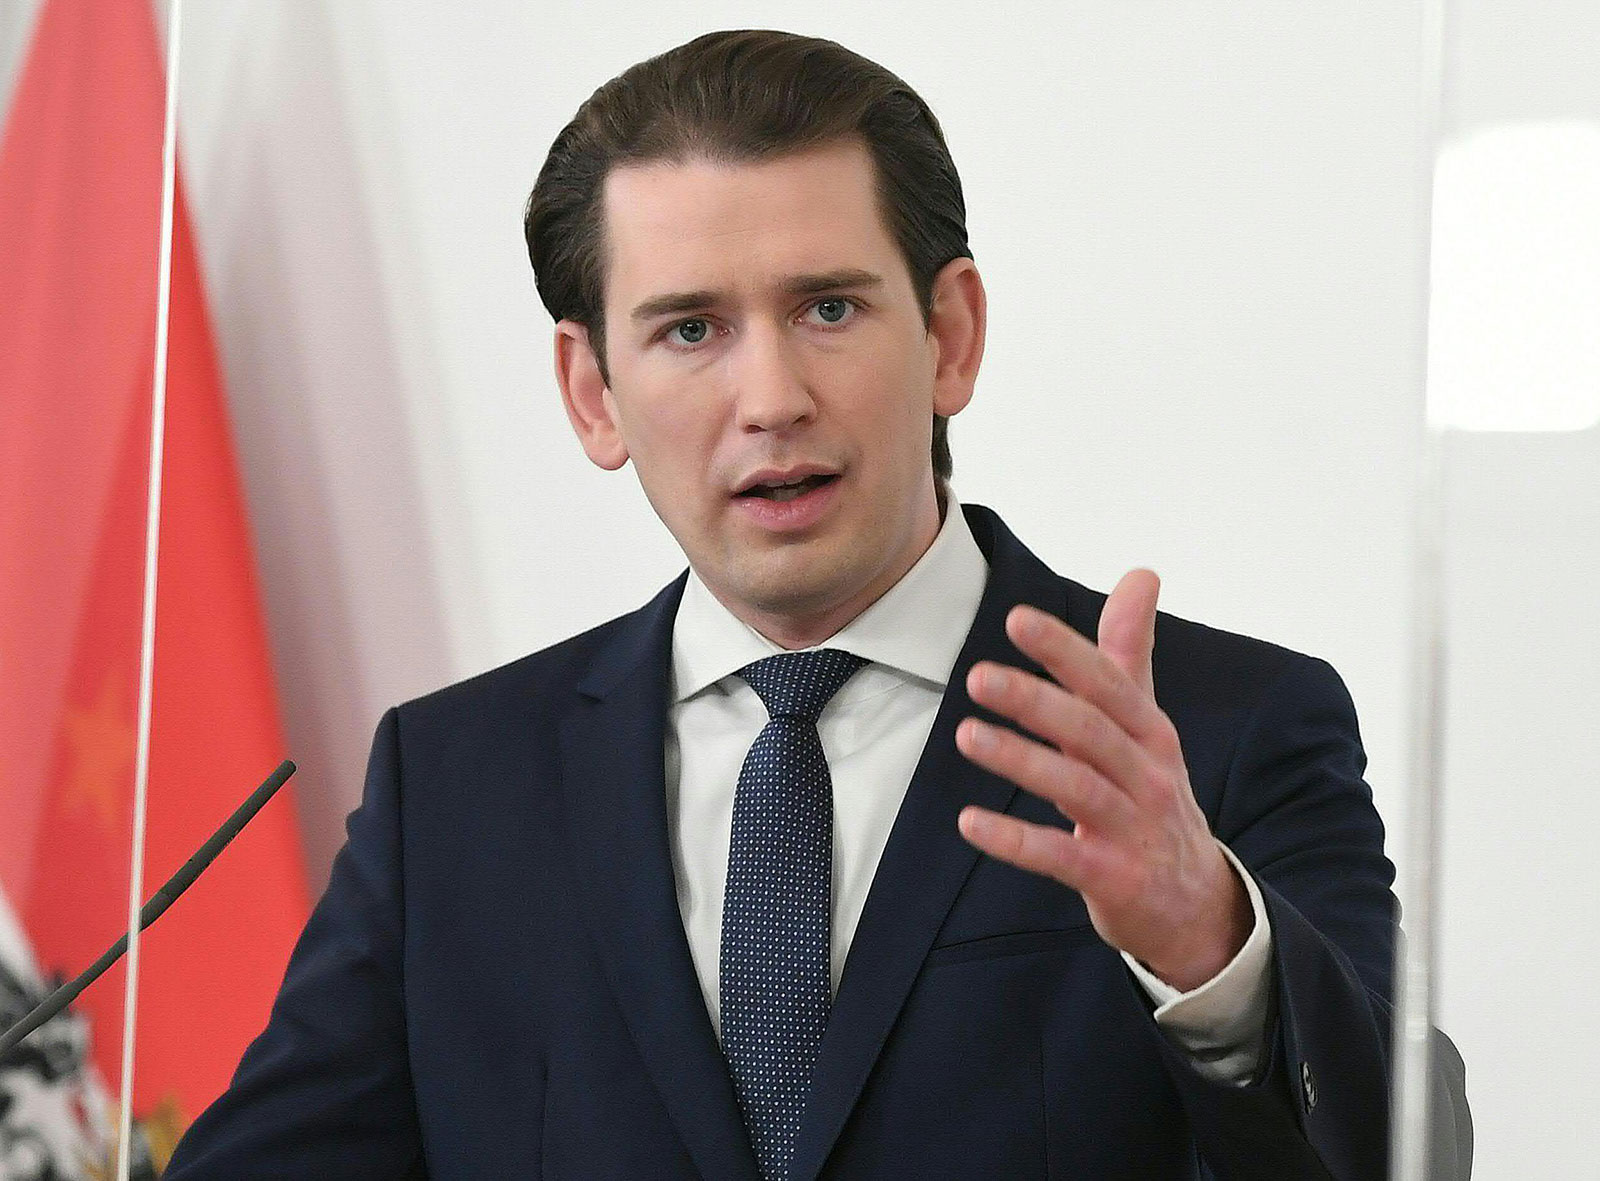 Austrian Chancellor Sebastian Kurz speaks at a press conference in Vienna on February 1.